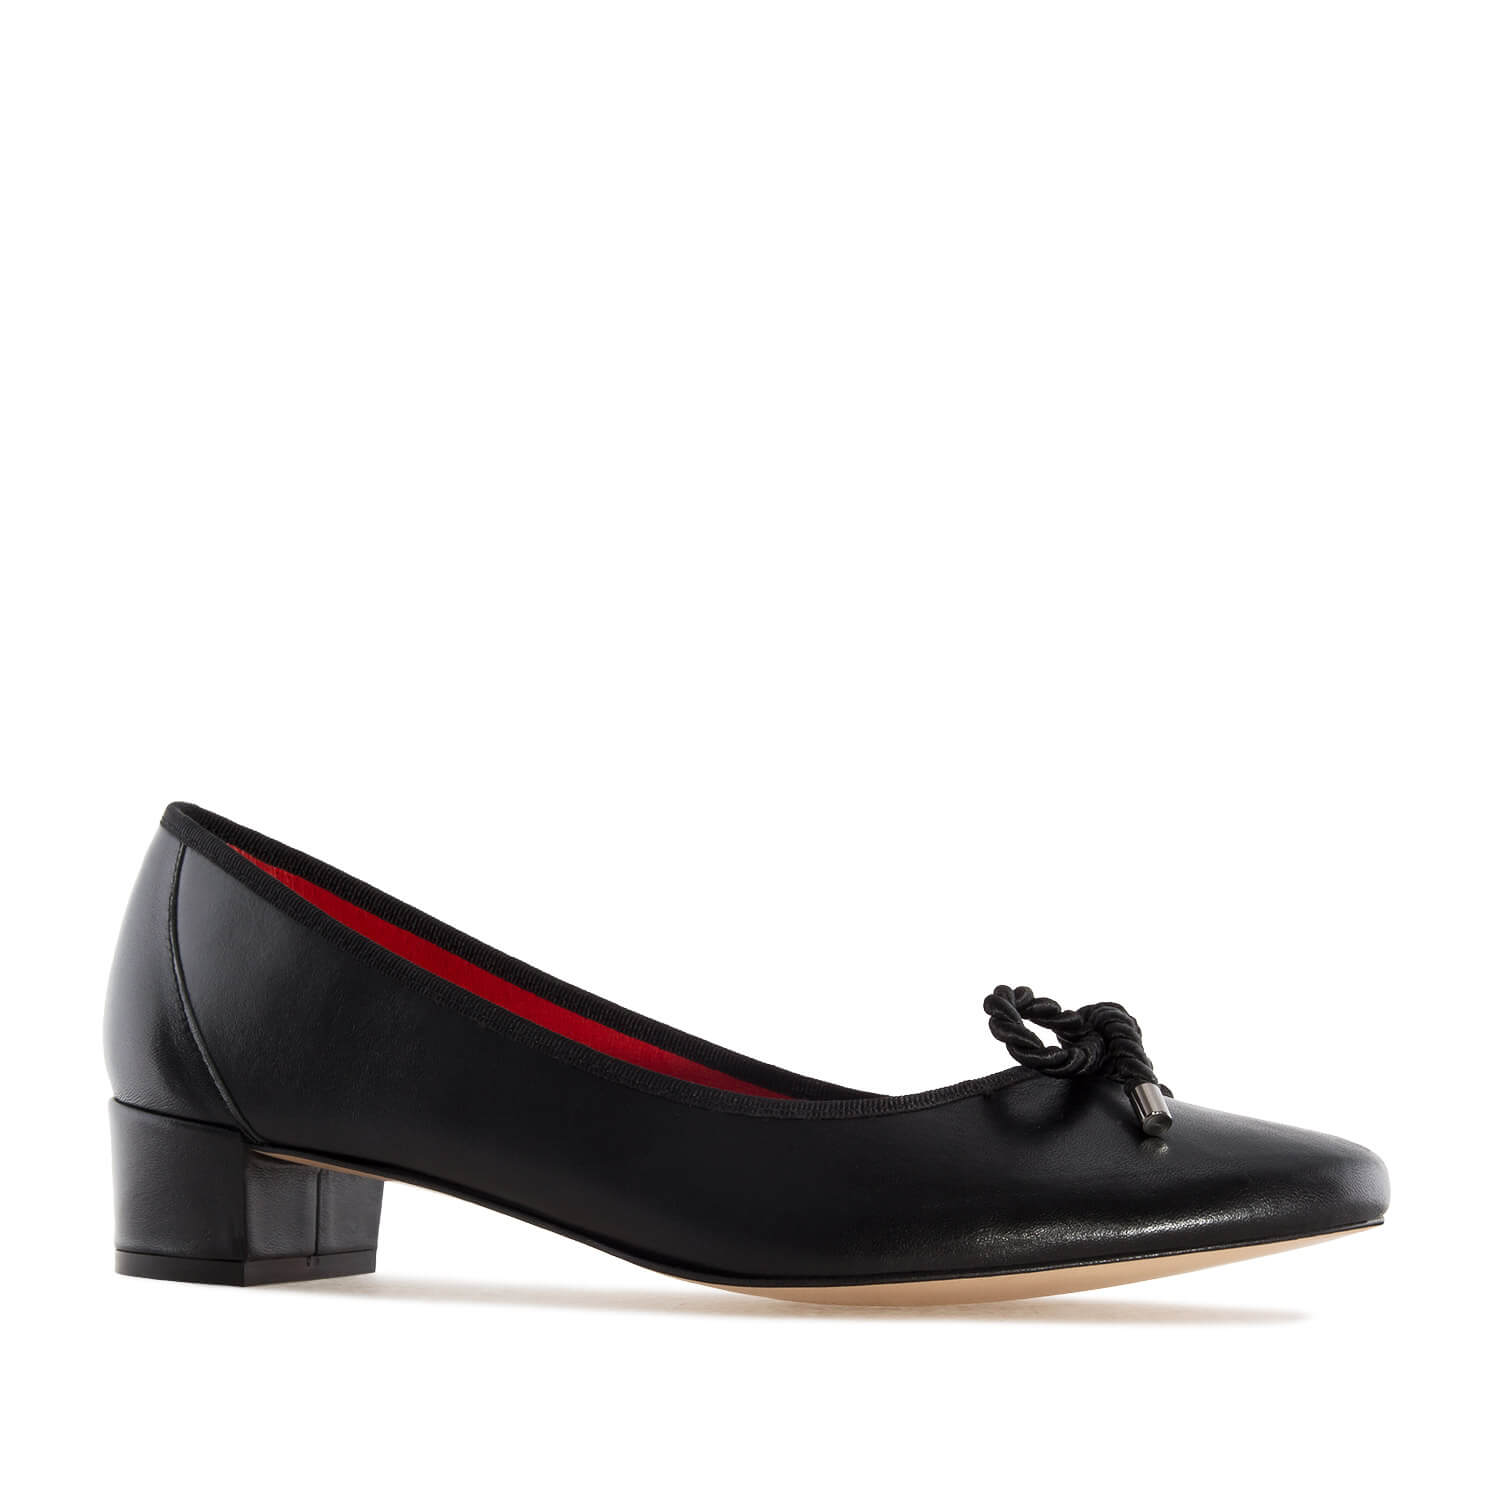 Reef Knot Black Leather Ballet Flats 